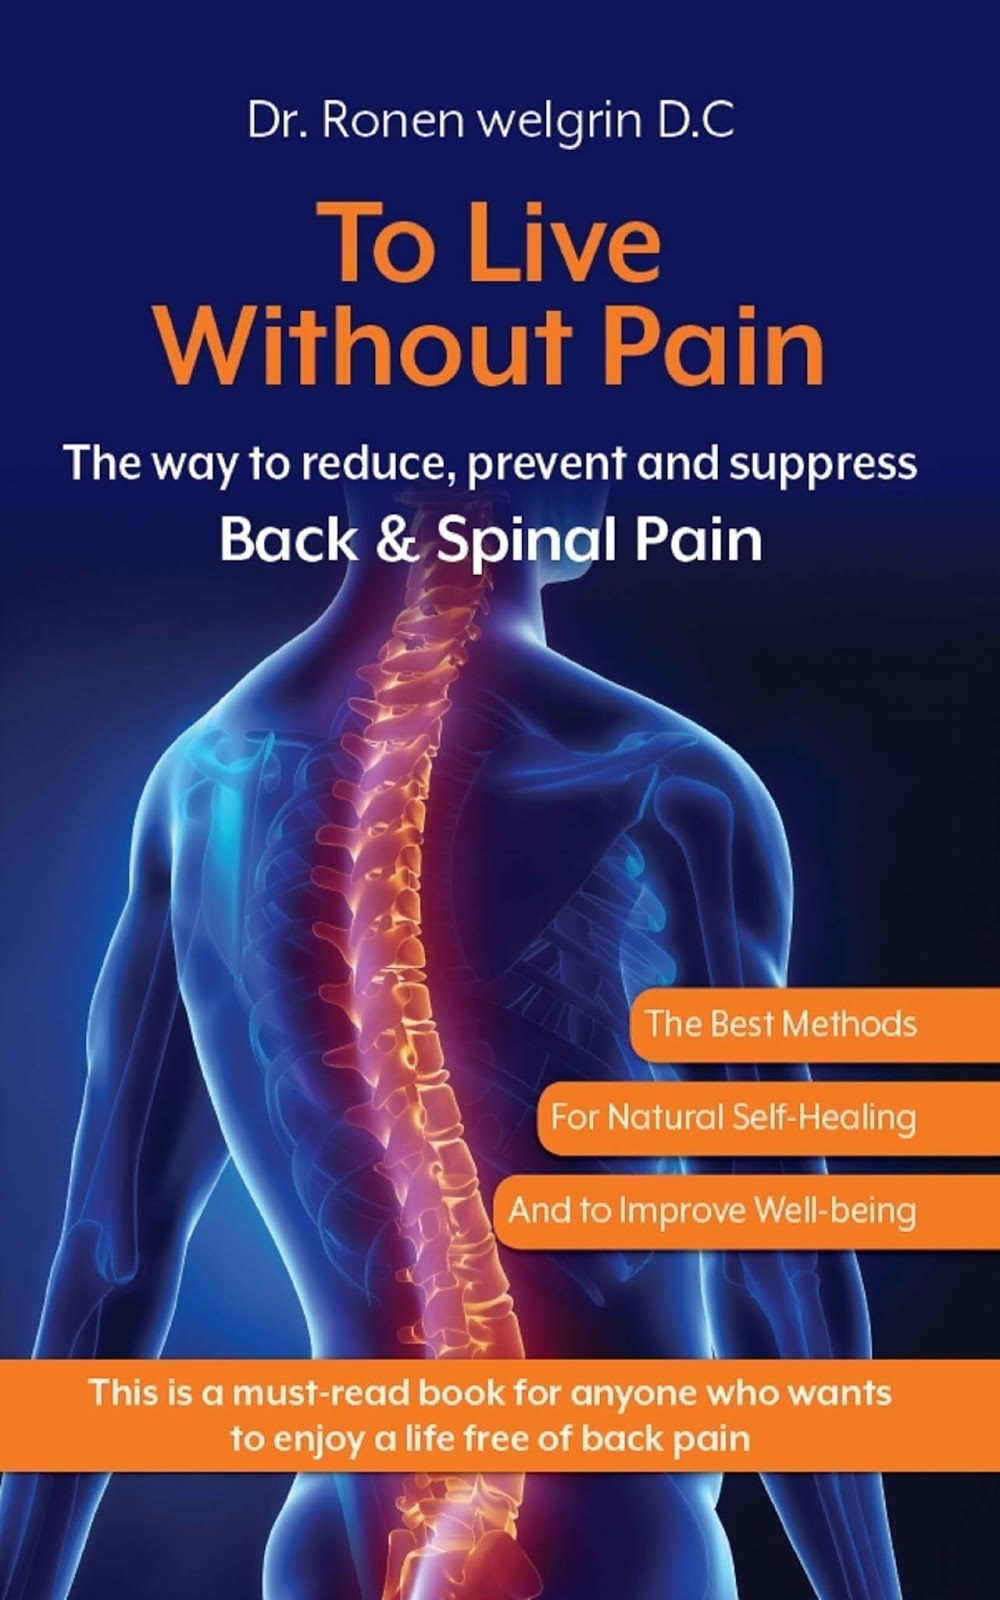 Life without Pain. Pain without e. Books for children Front back Spine Cover. Without pain